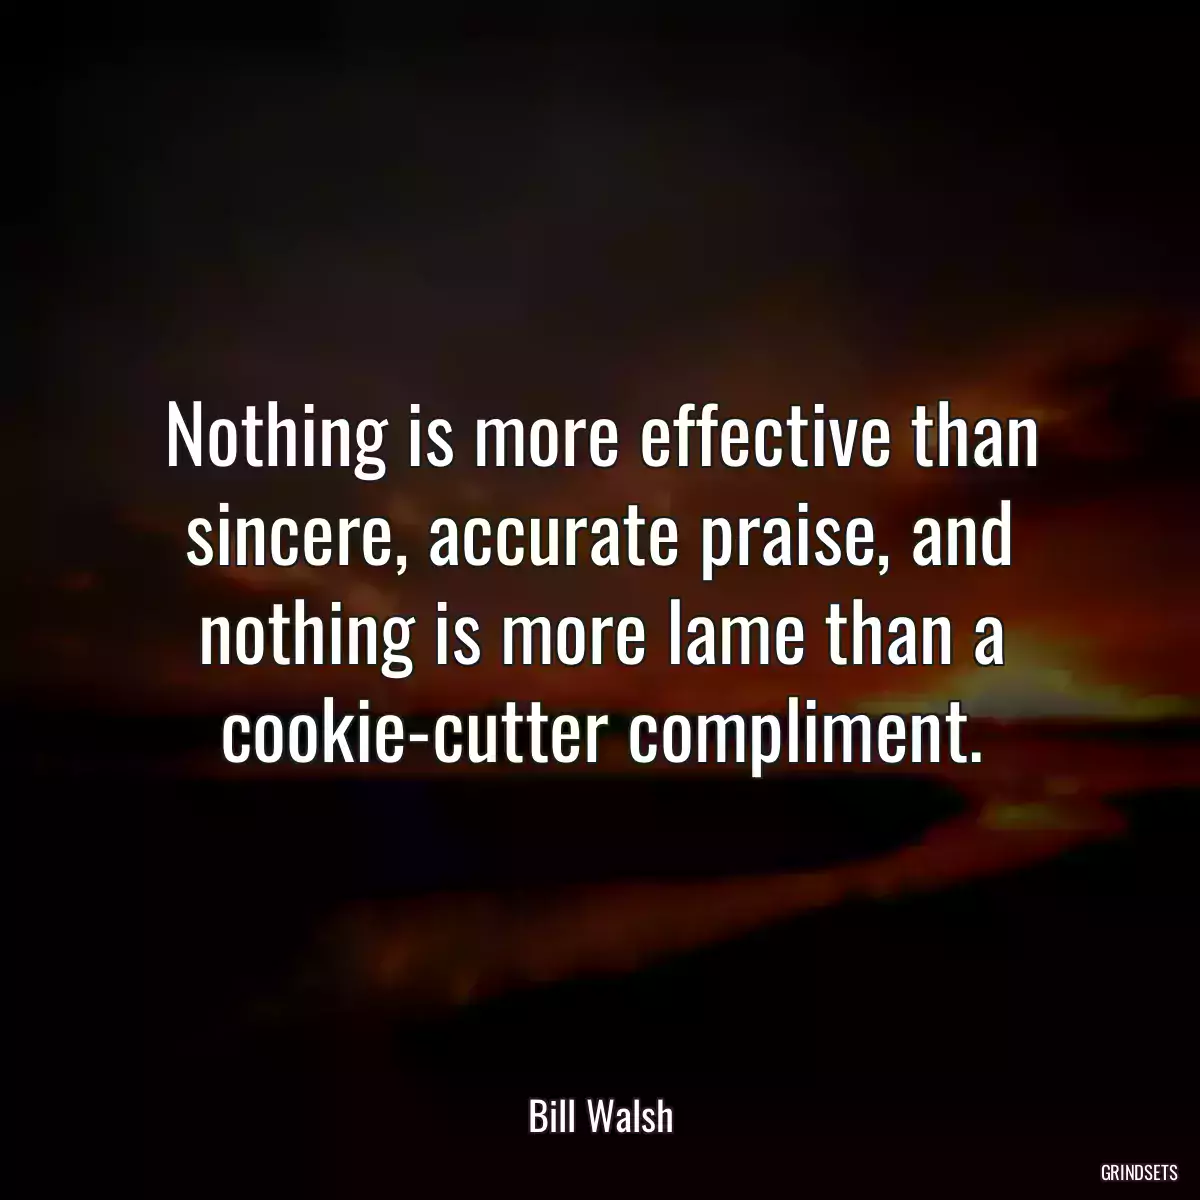 Nothing is more effective than sincere, accurate praise, and nothing is more lame than a cookie-cutter compliment.